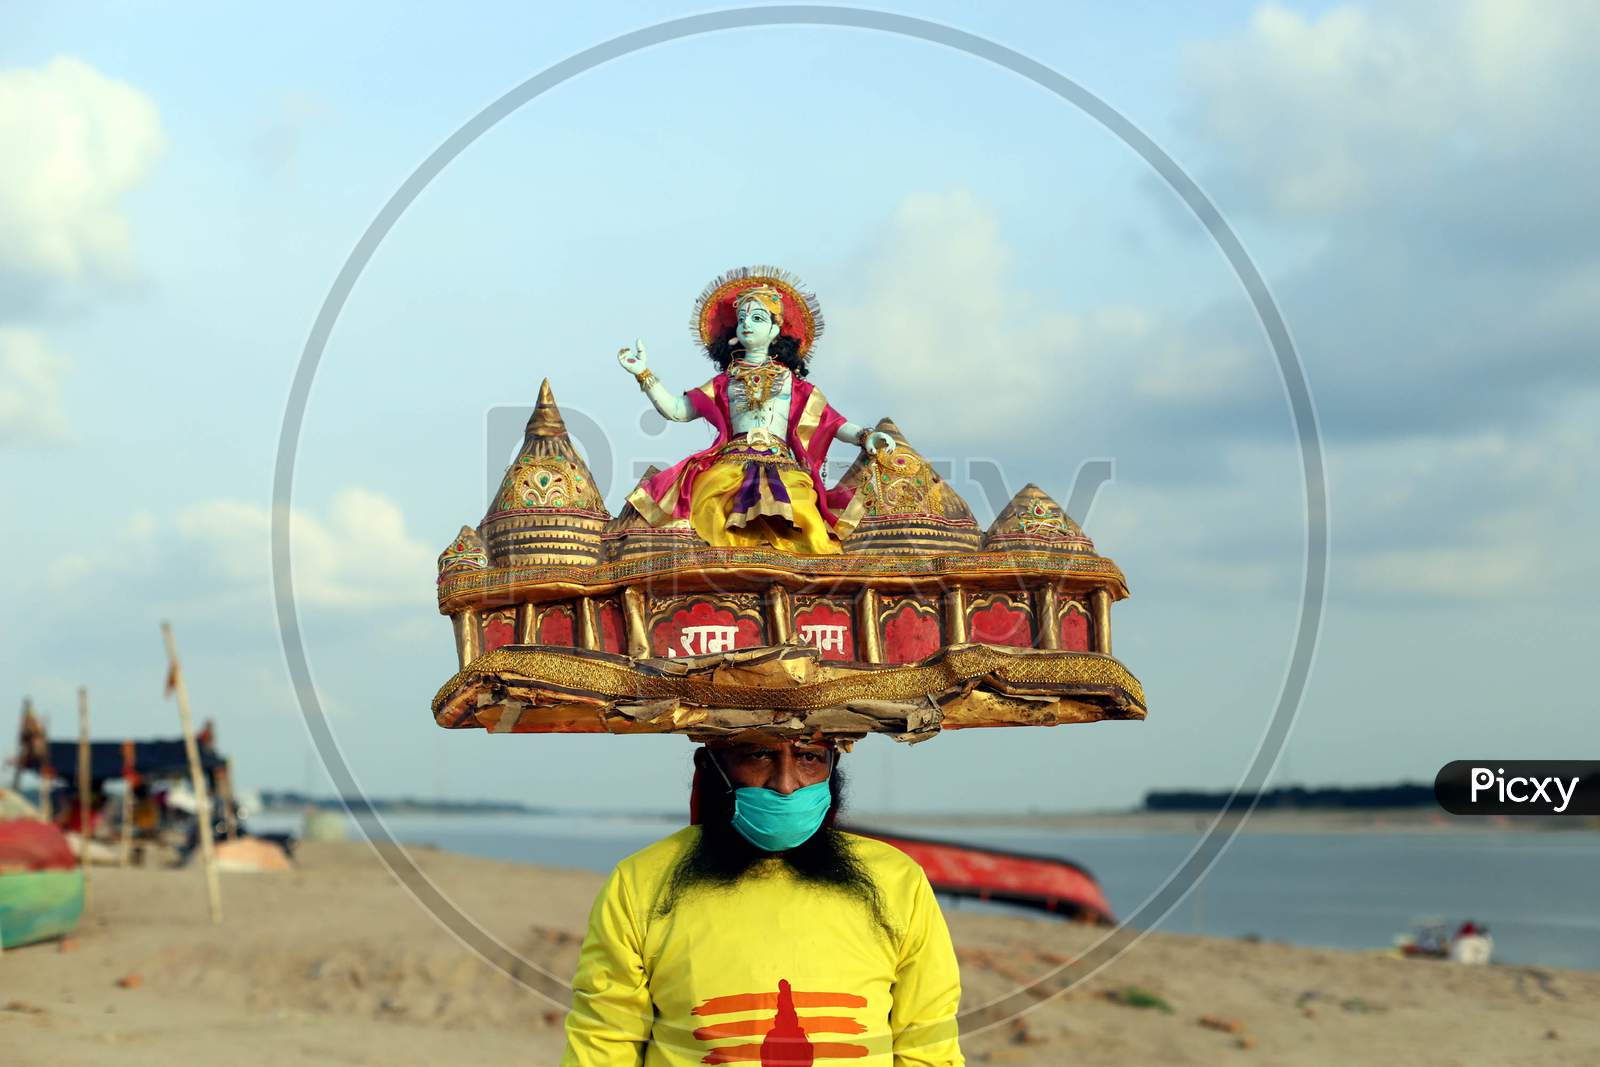 A man holds sculpture of Ram Temple on his head, ahead of the foundation ceremony of Ram temple in Ayodhya, on the banks of River Ganga at Sangam, in Prayagraj, August 4, 2020.